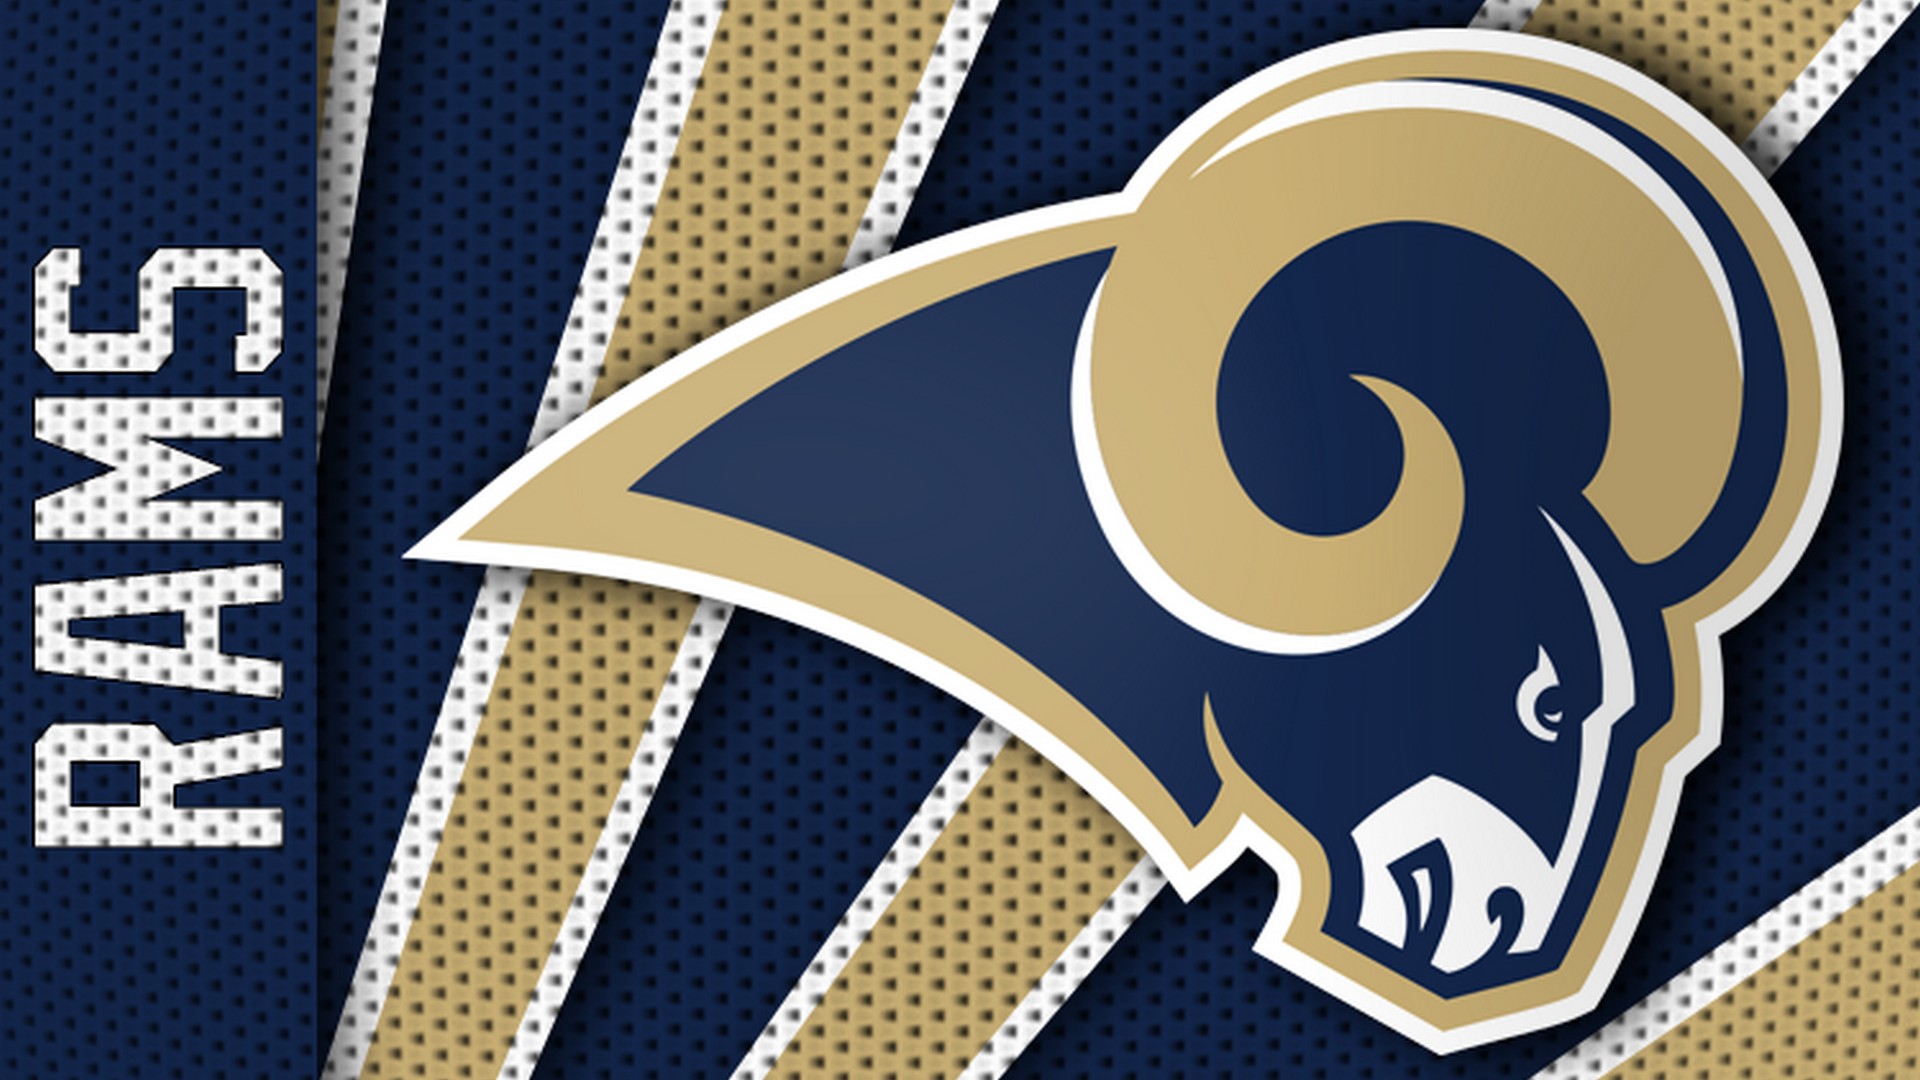 Wallpapers HD Los Angeles Rams With Resolution 1920X1080 pixel. You can make this wallpaper for your Mac or Windows Desktop Background, iPhone, Android or Tablet and another Smartphone device for free